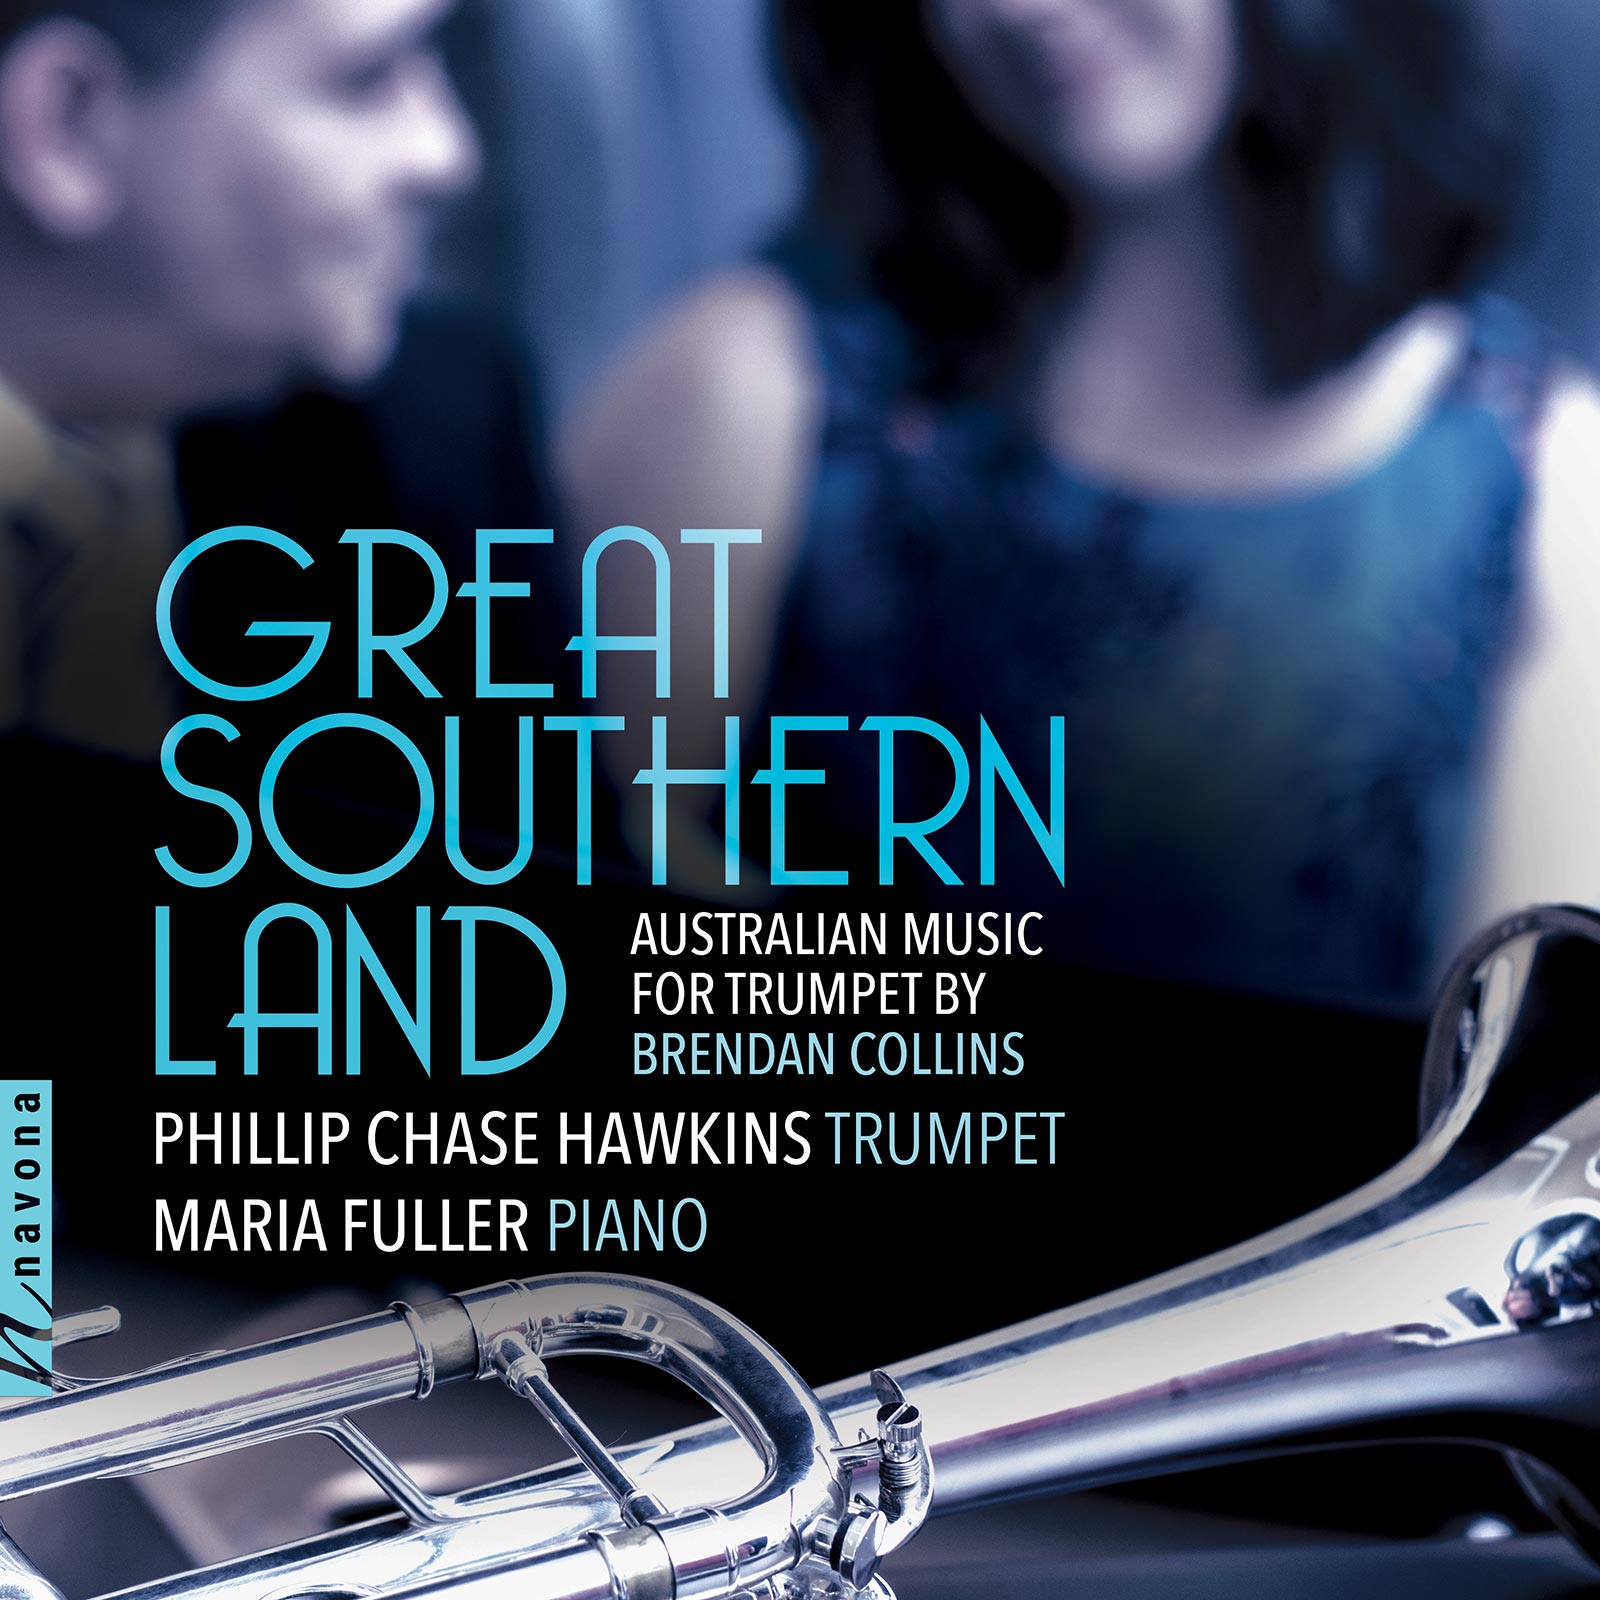 Great Southern – Navona Records